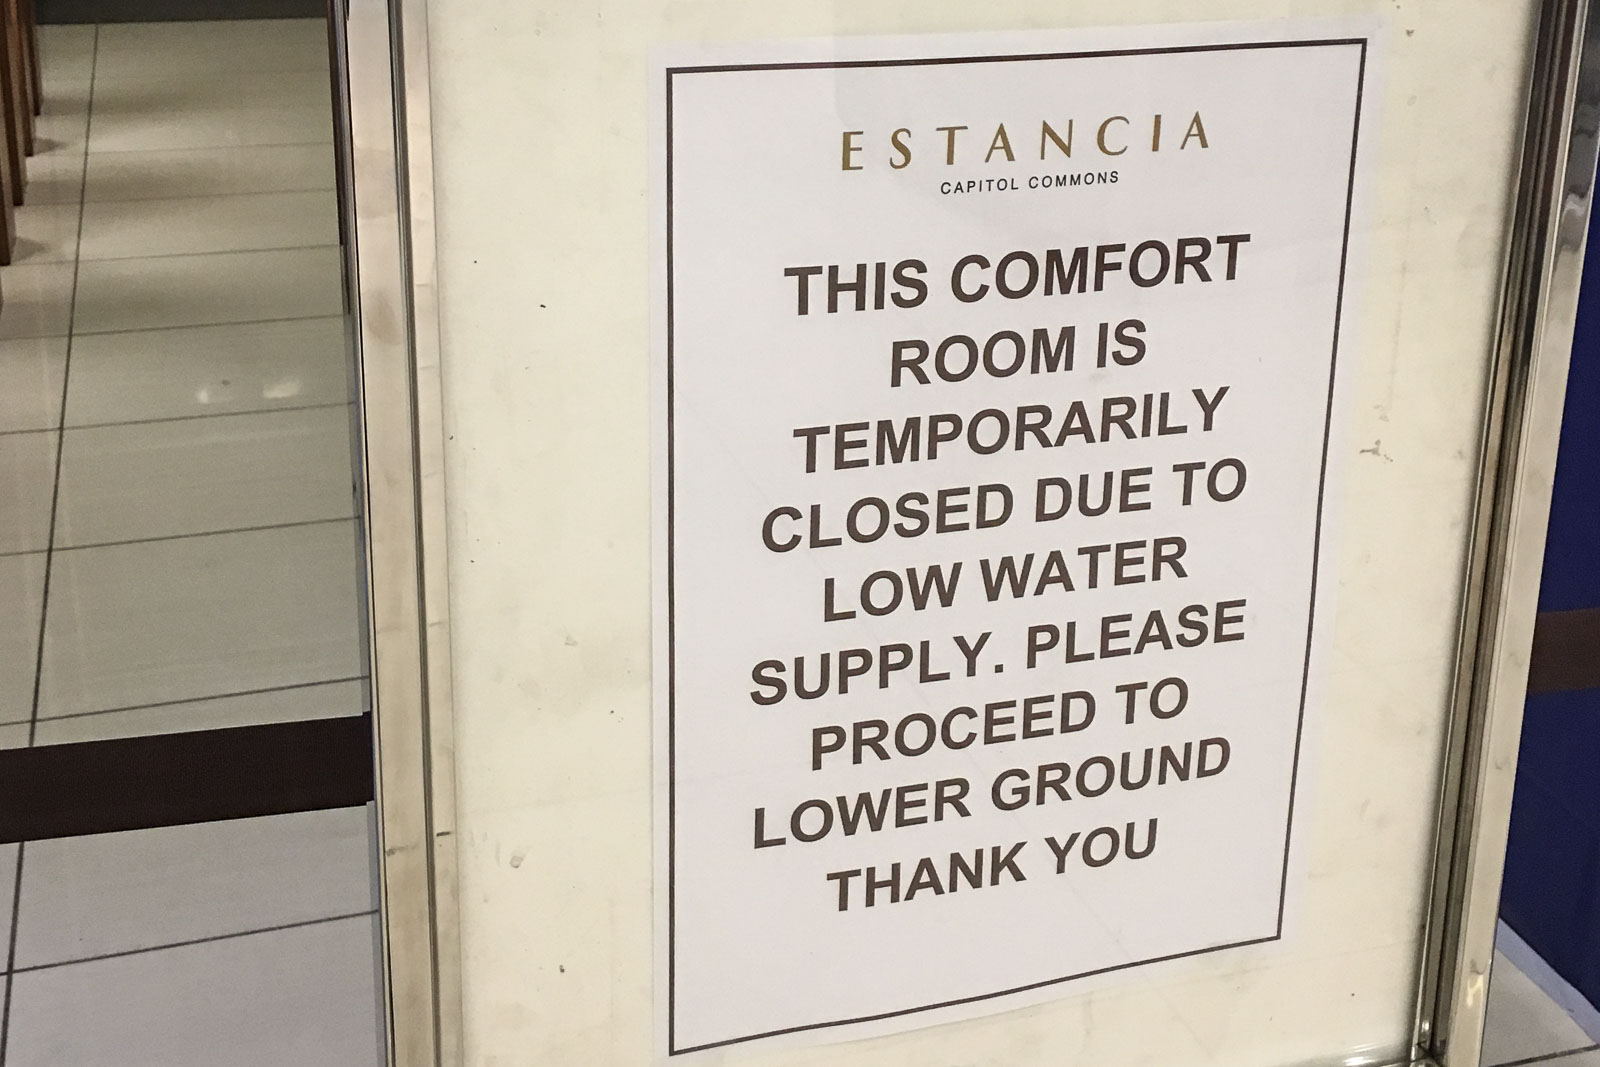 NO COMFORT. Estancia mall temporarily closes some of its comfort rooms due to low water supply. Photo by Ralf Rivas/Rappler 